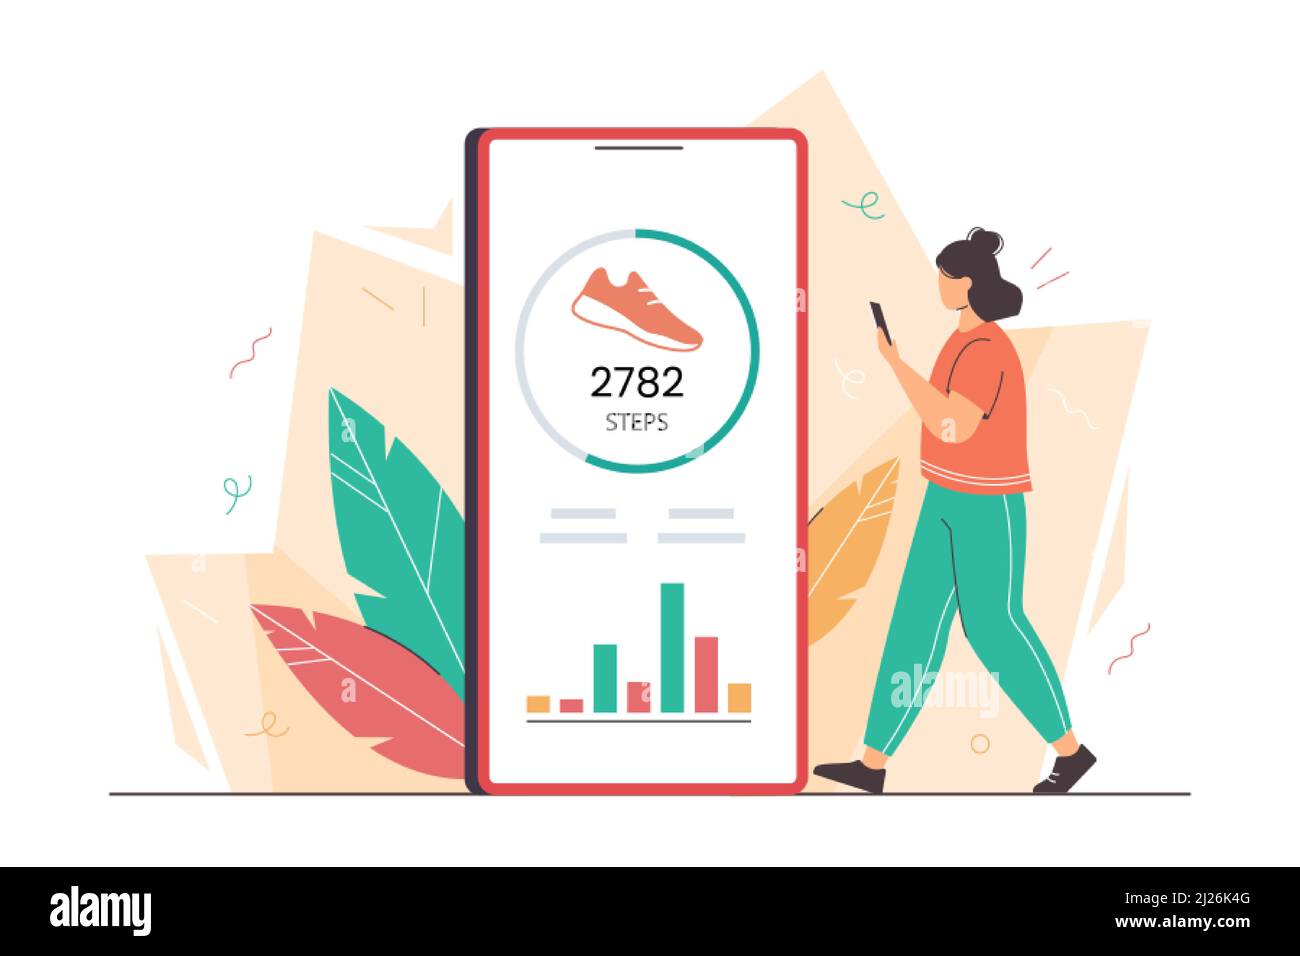 Flat woman using mobile for counting steps. Girl hold phone with pedometer or fitness tracker. Step counter app on smartphone. Track daily walking progress on device screen. Healthy lifestyle concept. Stock Vector